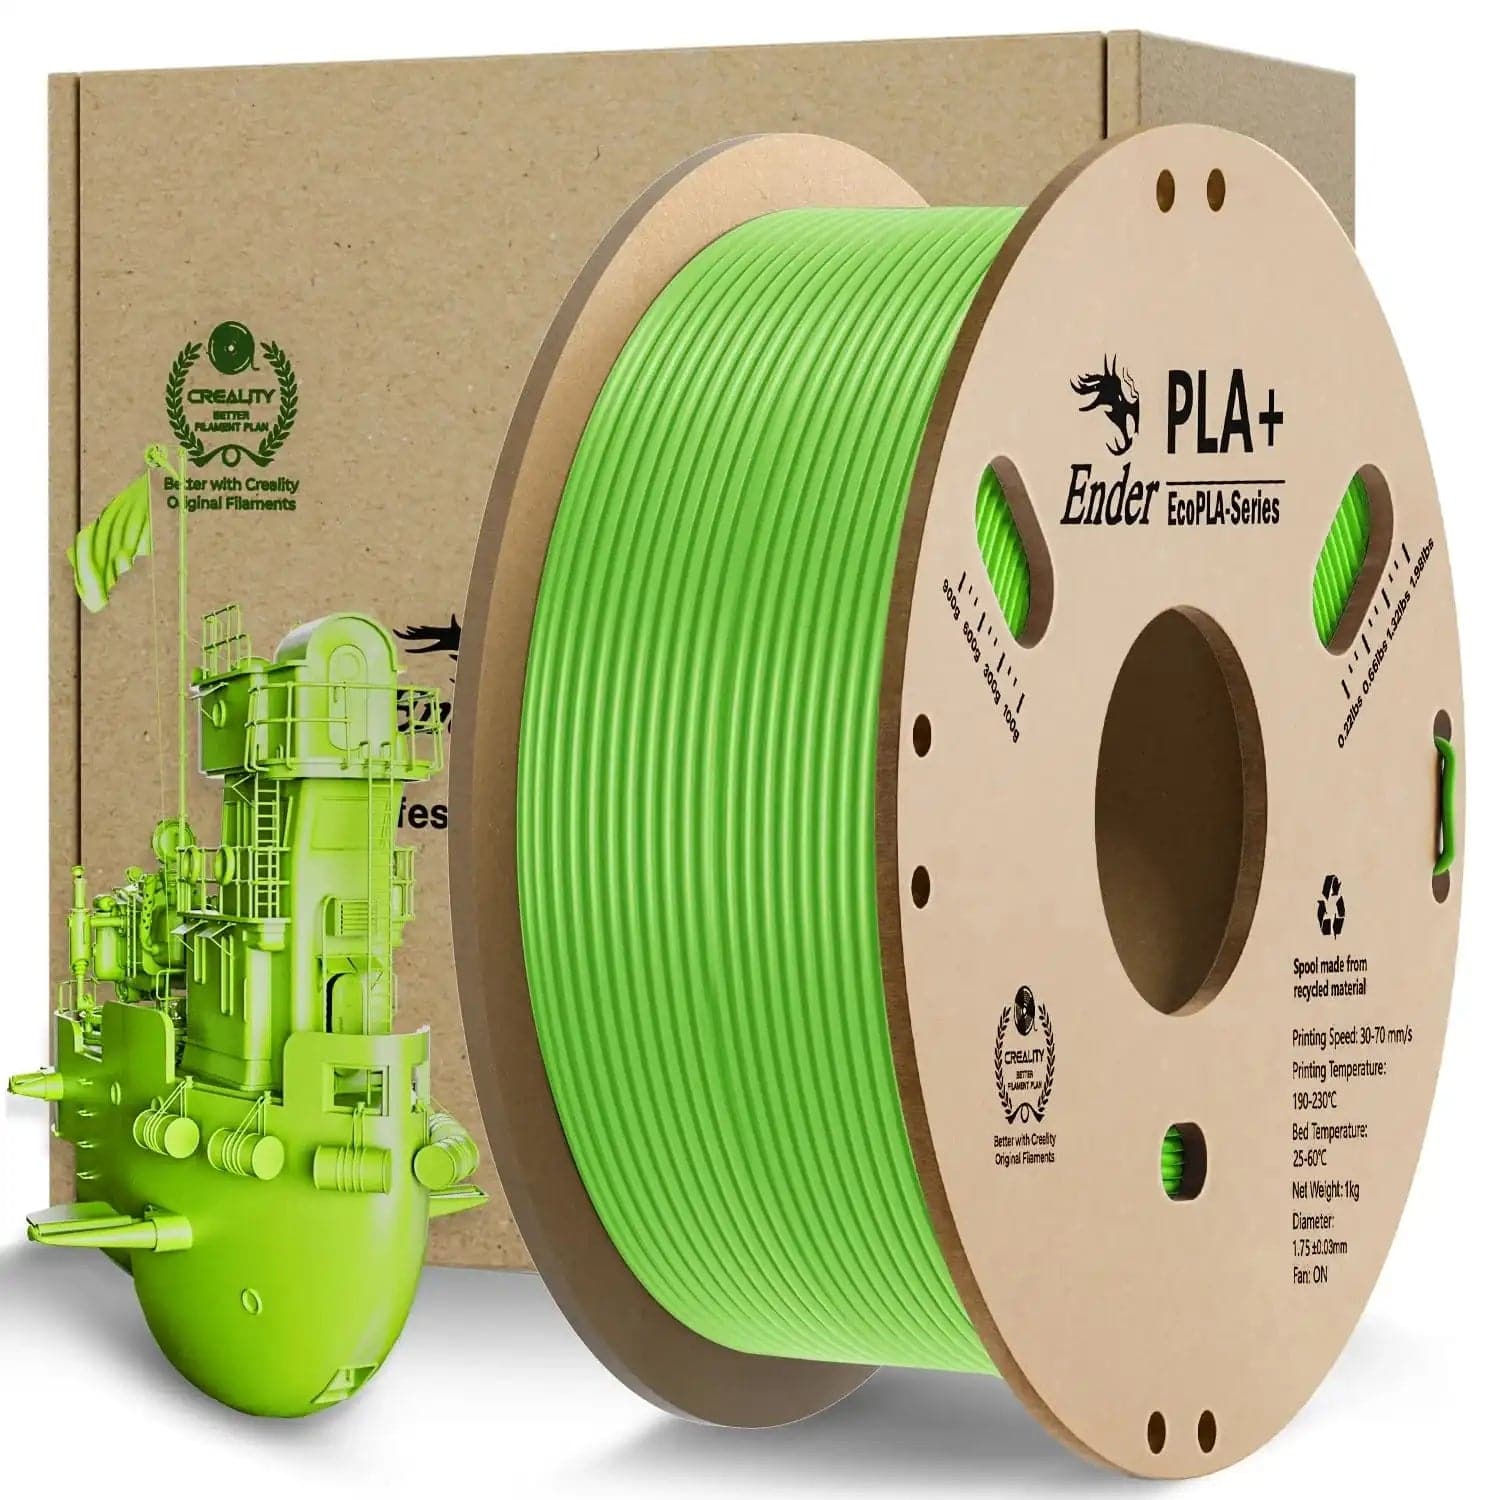 Creality Ender PLA+ 1.75mm 1KG Eco PLA Filament
【Ship From Amazon FBA Warehouse】Same shipping service with Amazon. Enjoy reliable performance and fast shipping with the Amazon FBA Warehouse.
【Creality Quality Ass75mm 1KG Eco PLA Filament3D Printing Materials